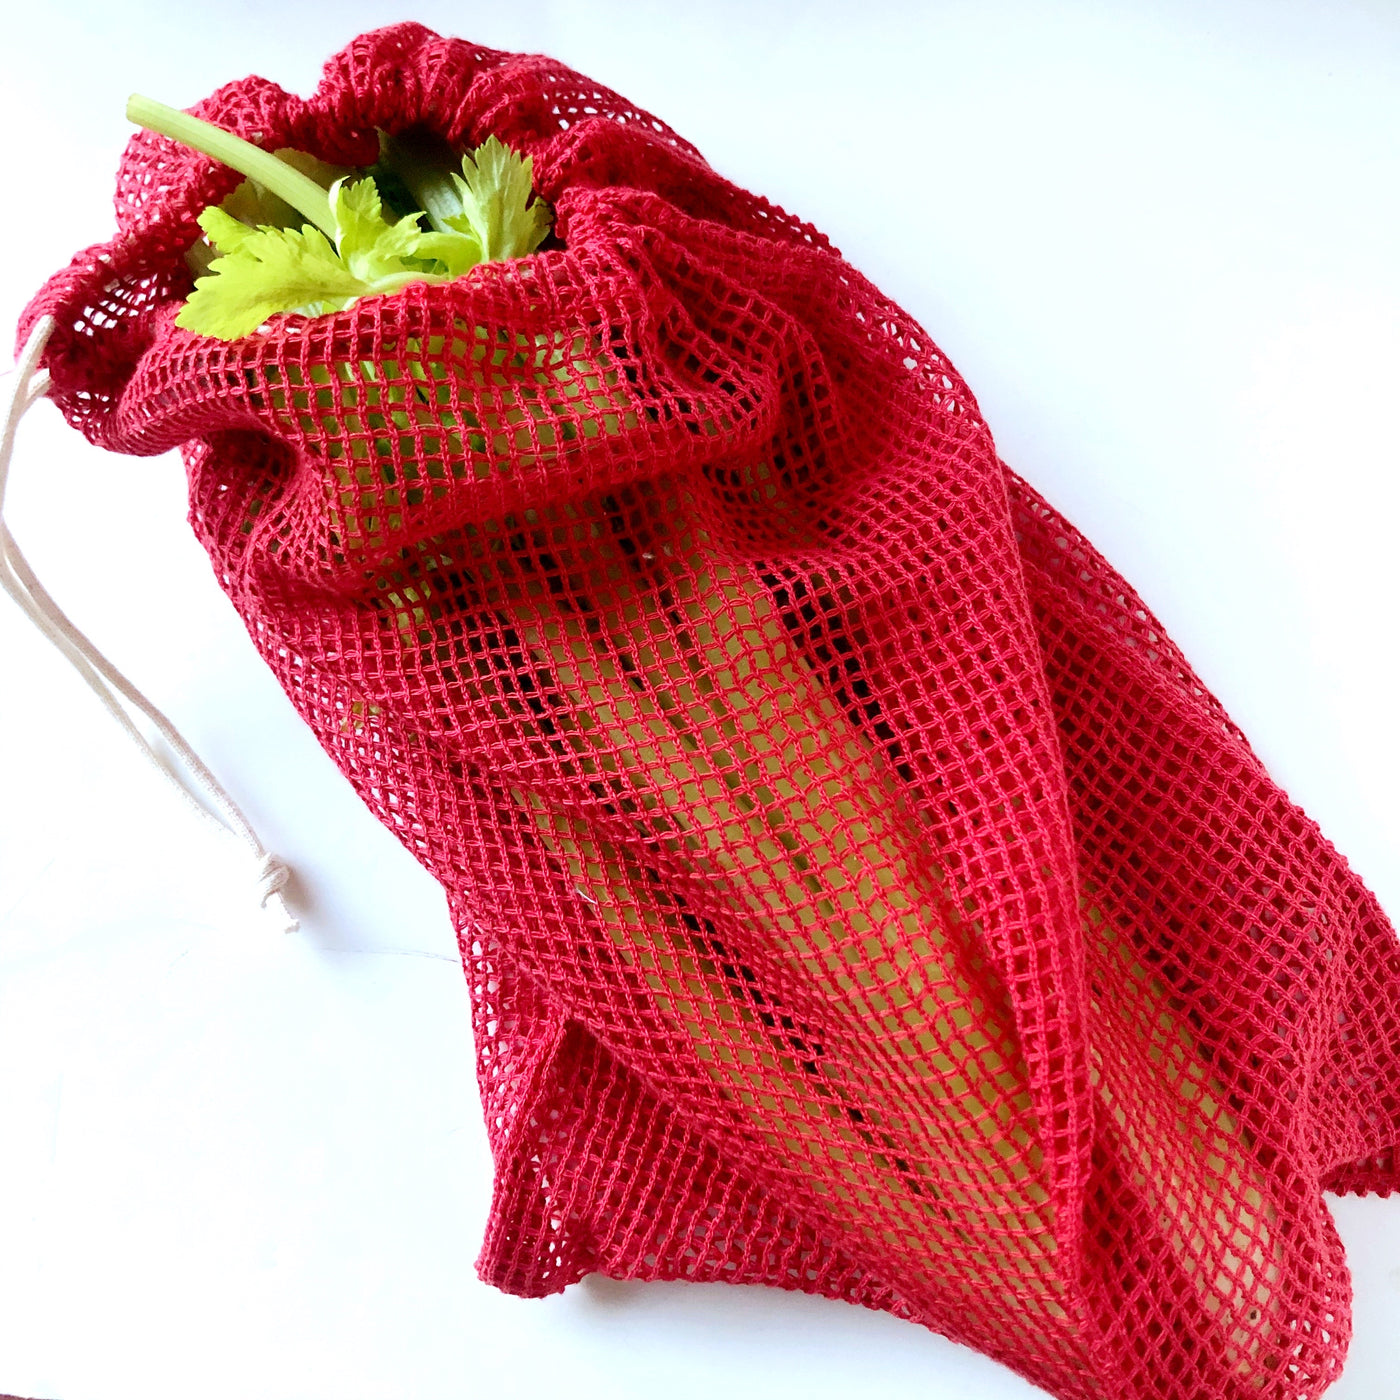 Chili Pepper Large Mesh Produce Bag - 100% Cotton - Barque Gifts